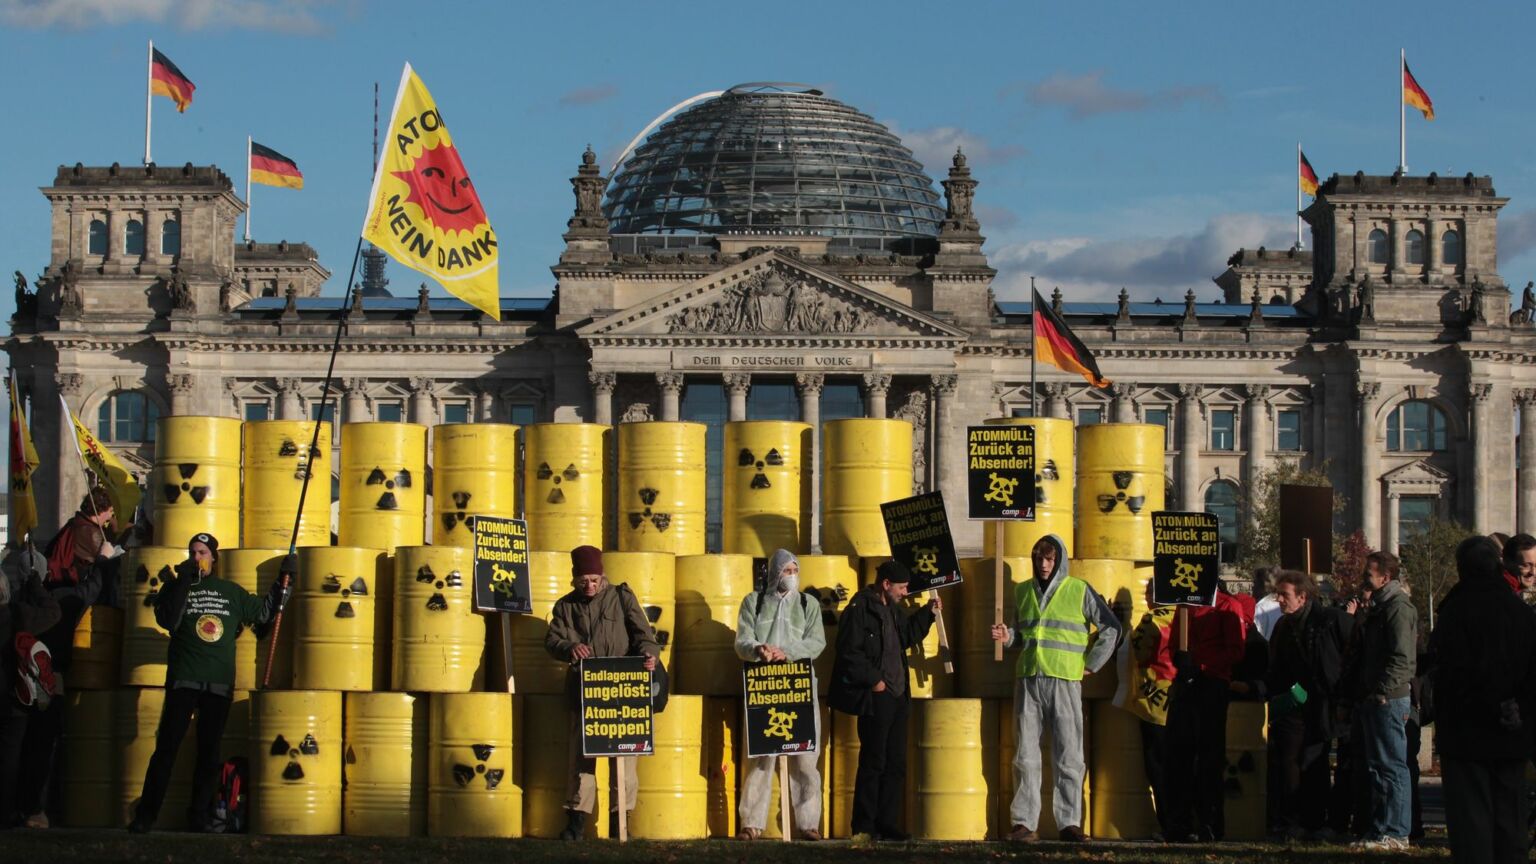 Germany-Nuclear-protest-barrels-1536x864.jpg